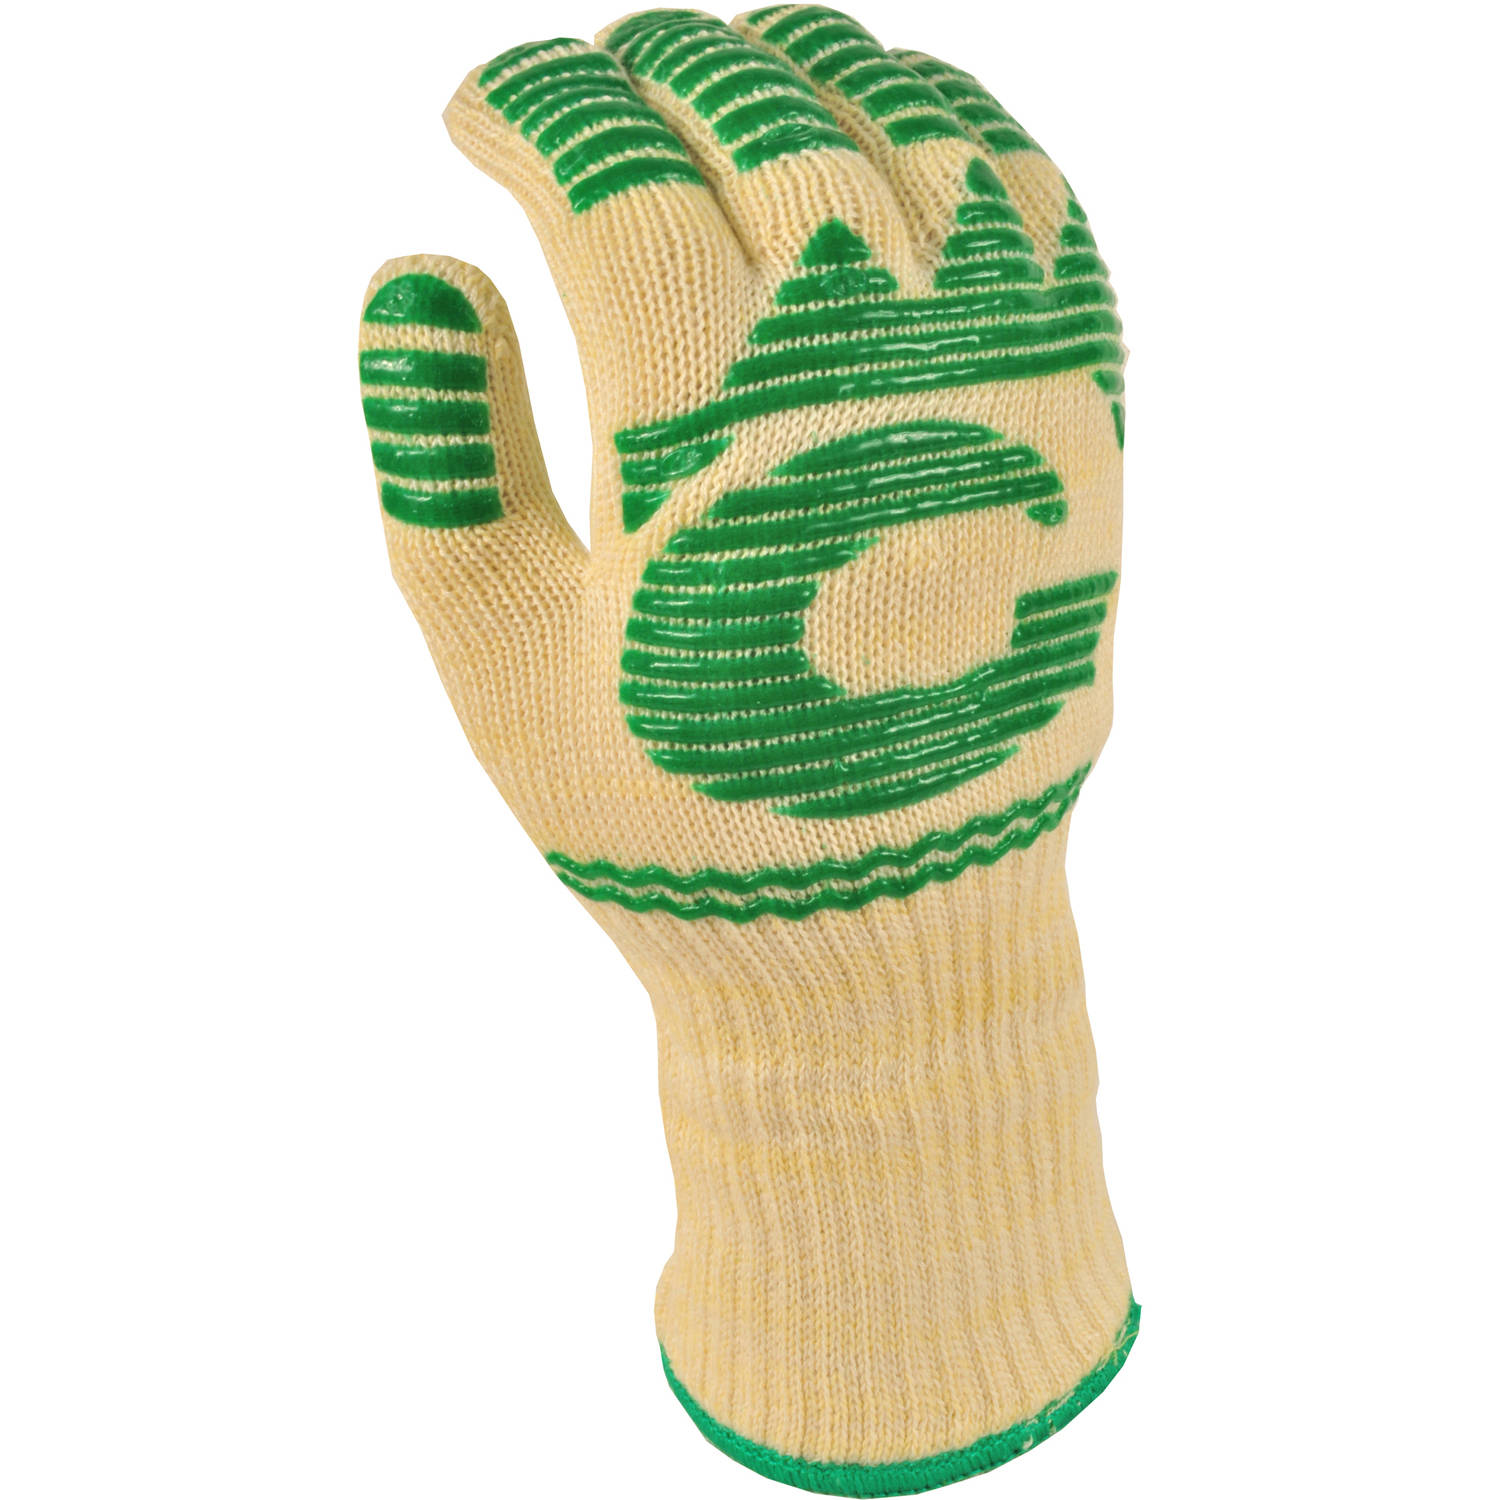 G & F Products Heat-Resistant Fireplace Gloves, Extra Long Cuff, 1 Piece - image 1 of 7